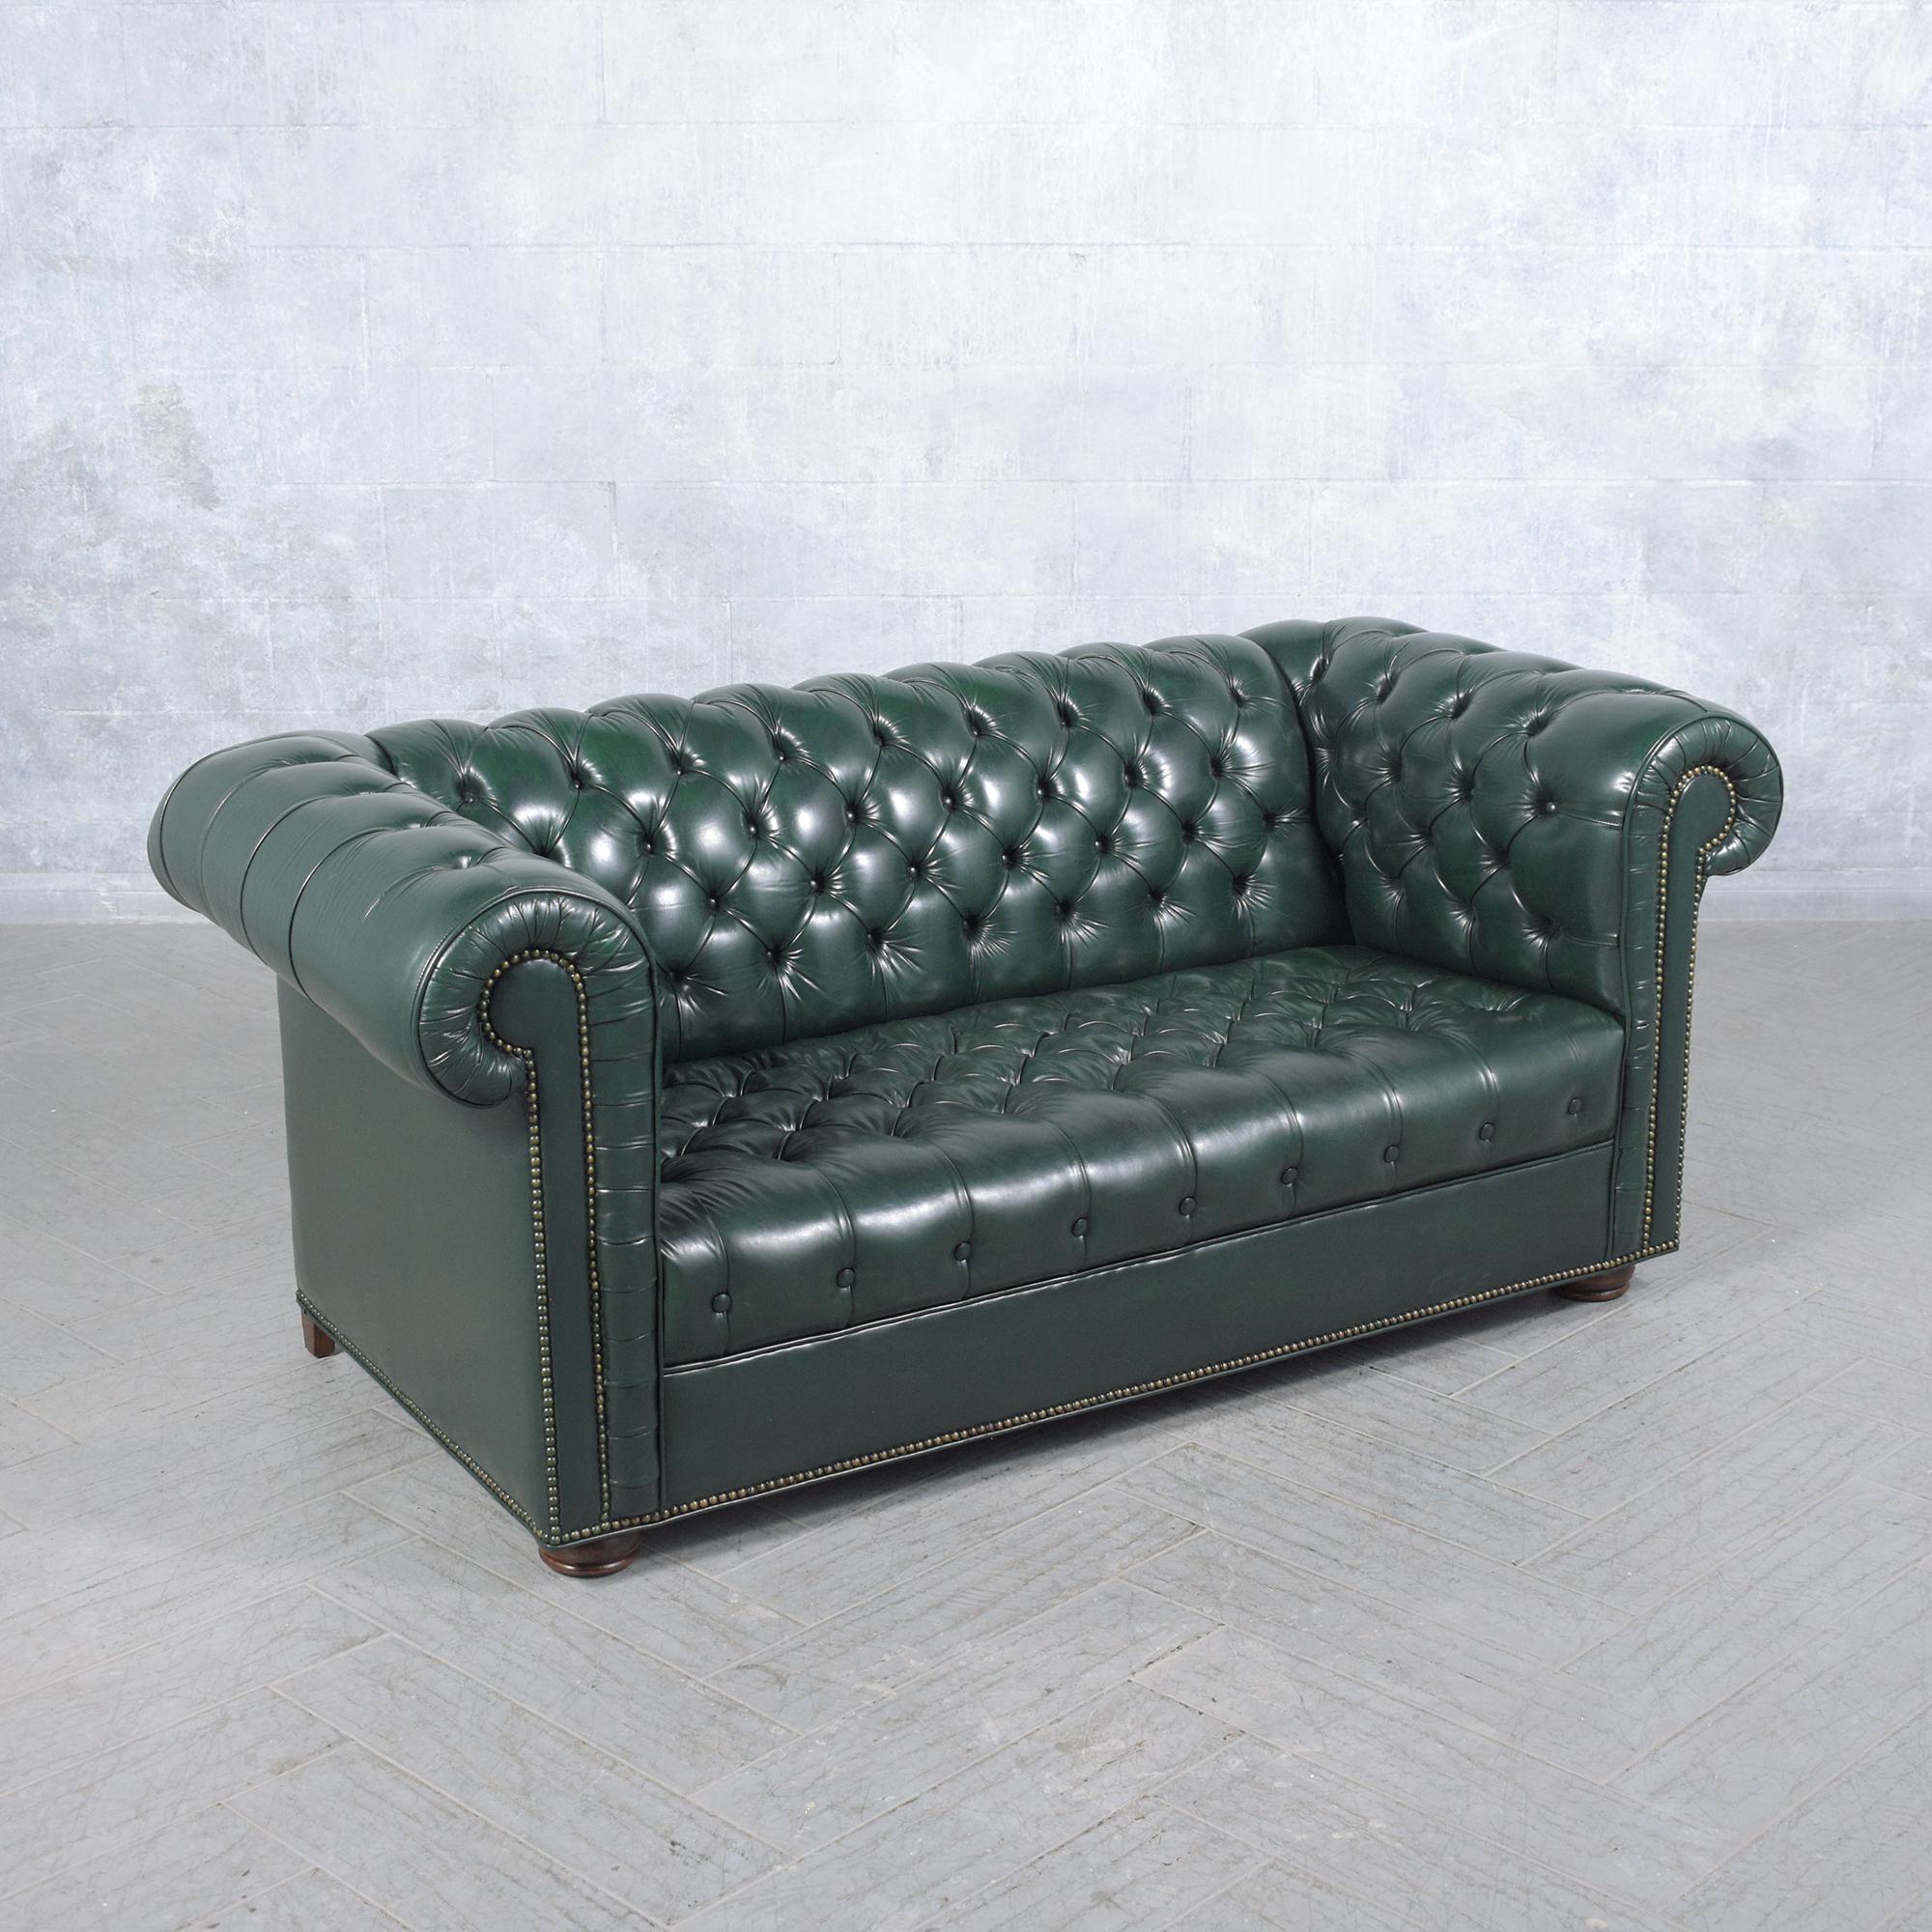 1970s Vintage Chesterfield Sofa: Emerald Green Leather with Elegant Carved Legs 3